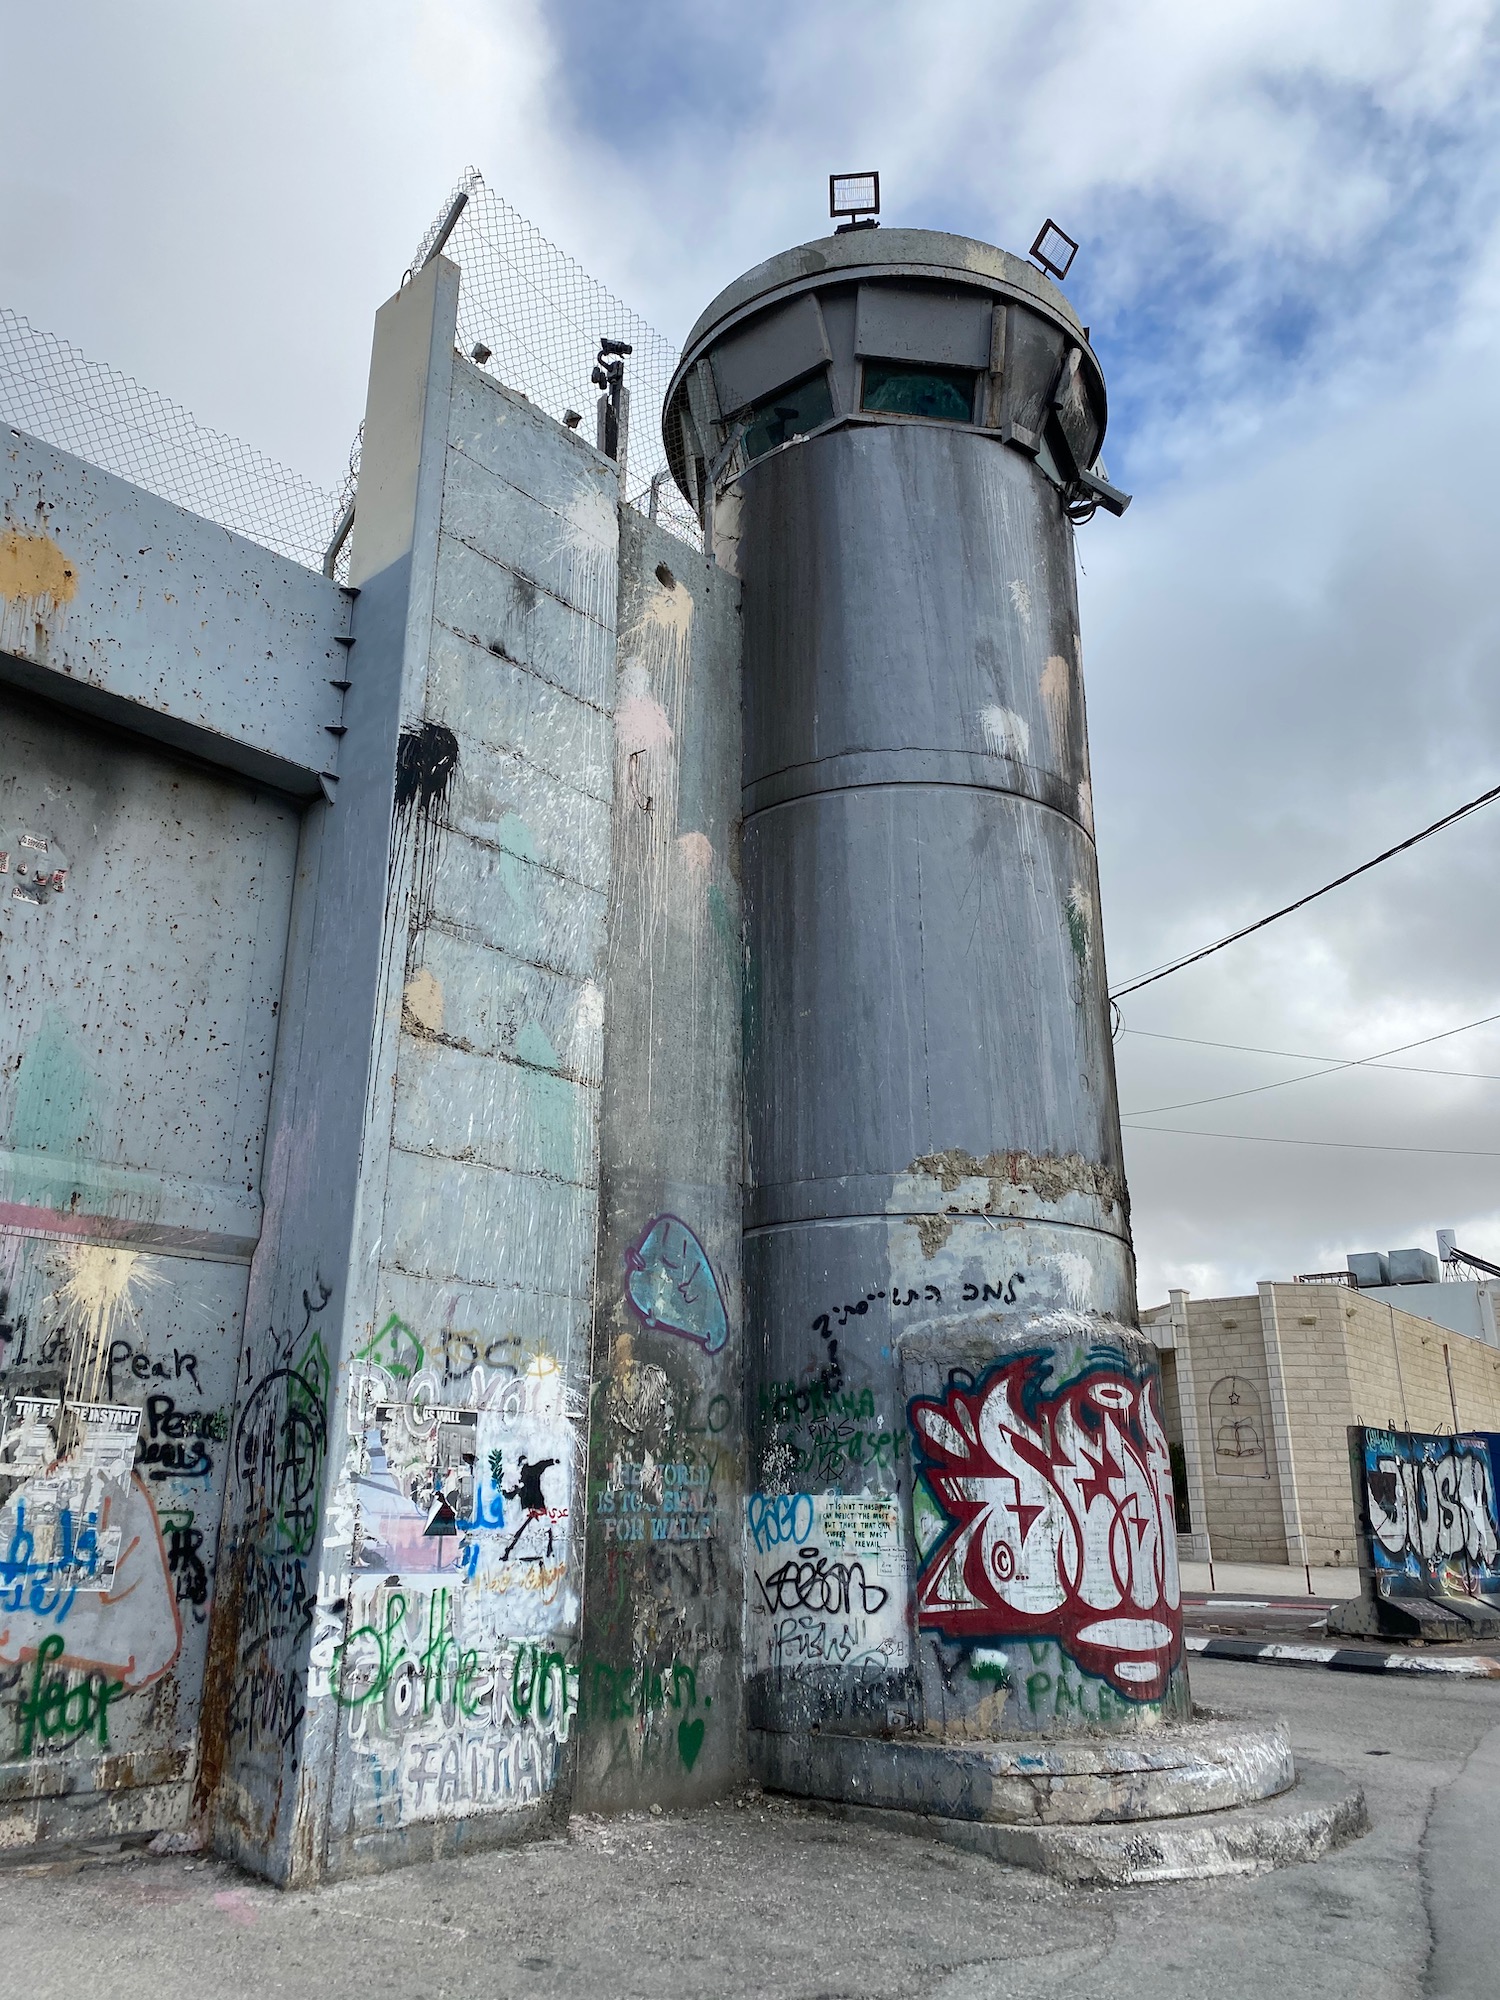 a concrete structure with graffiti on it